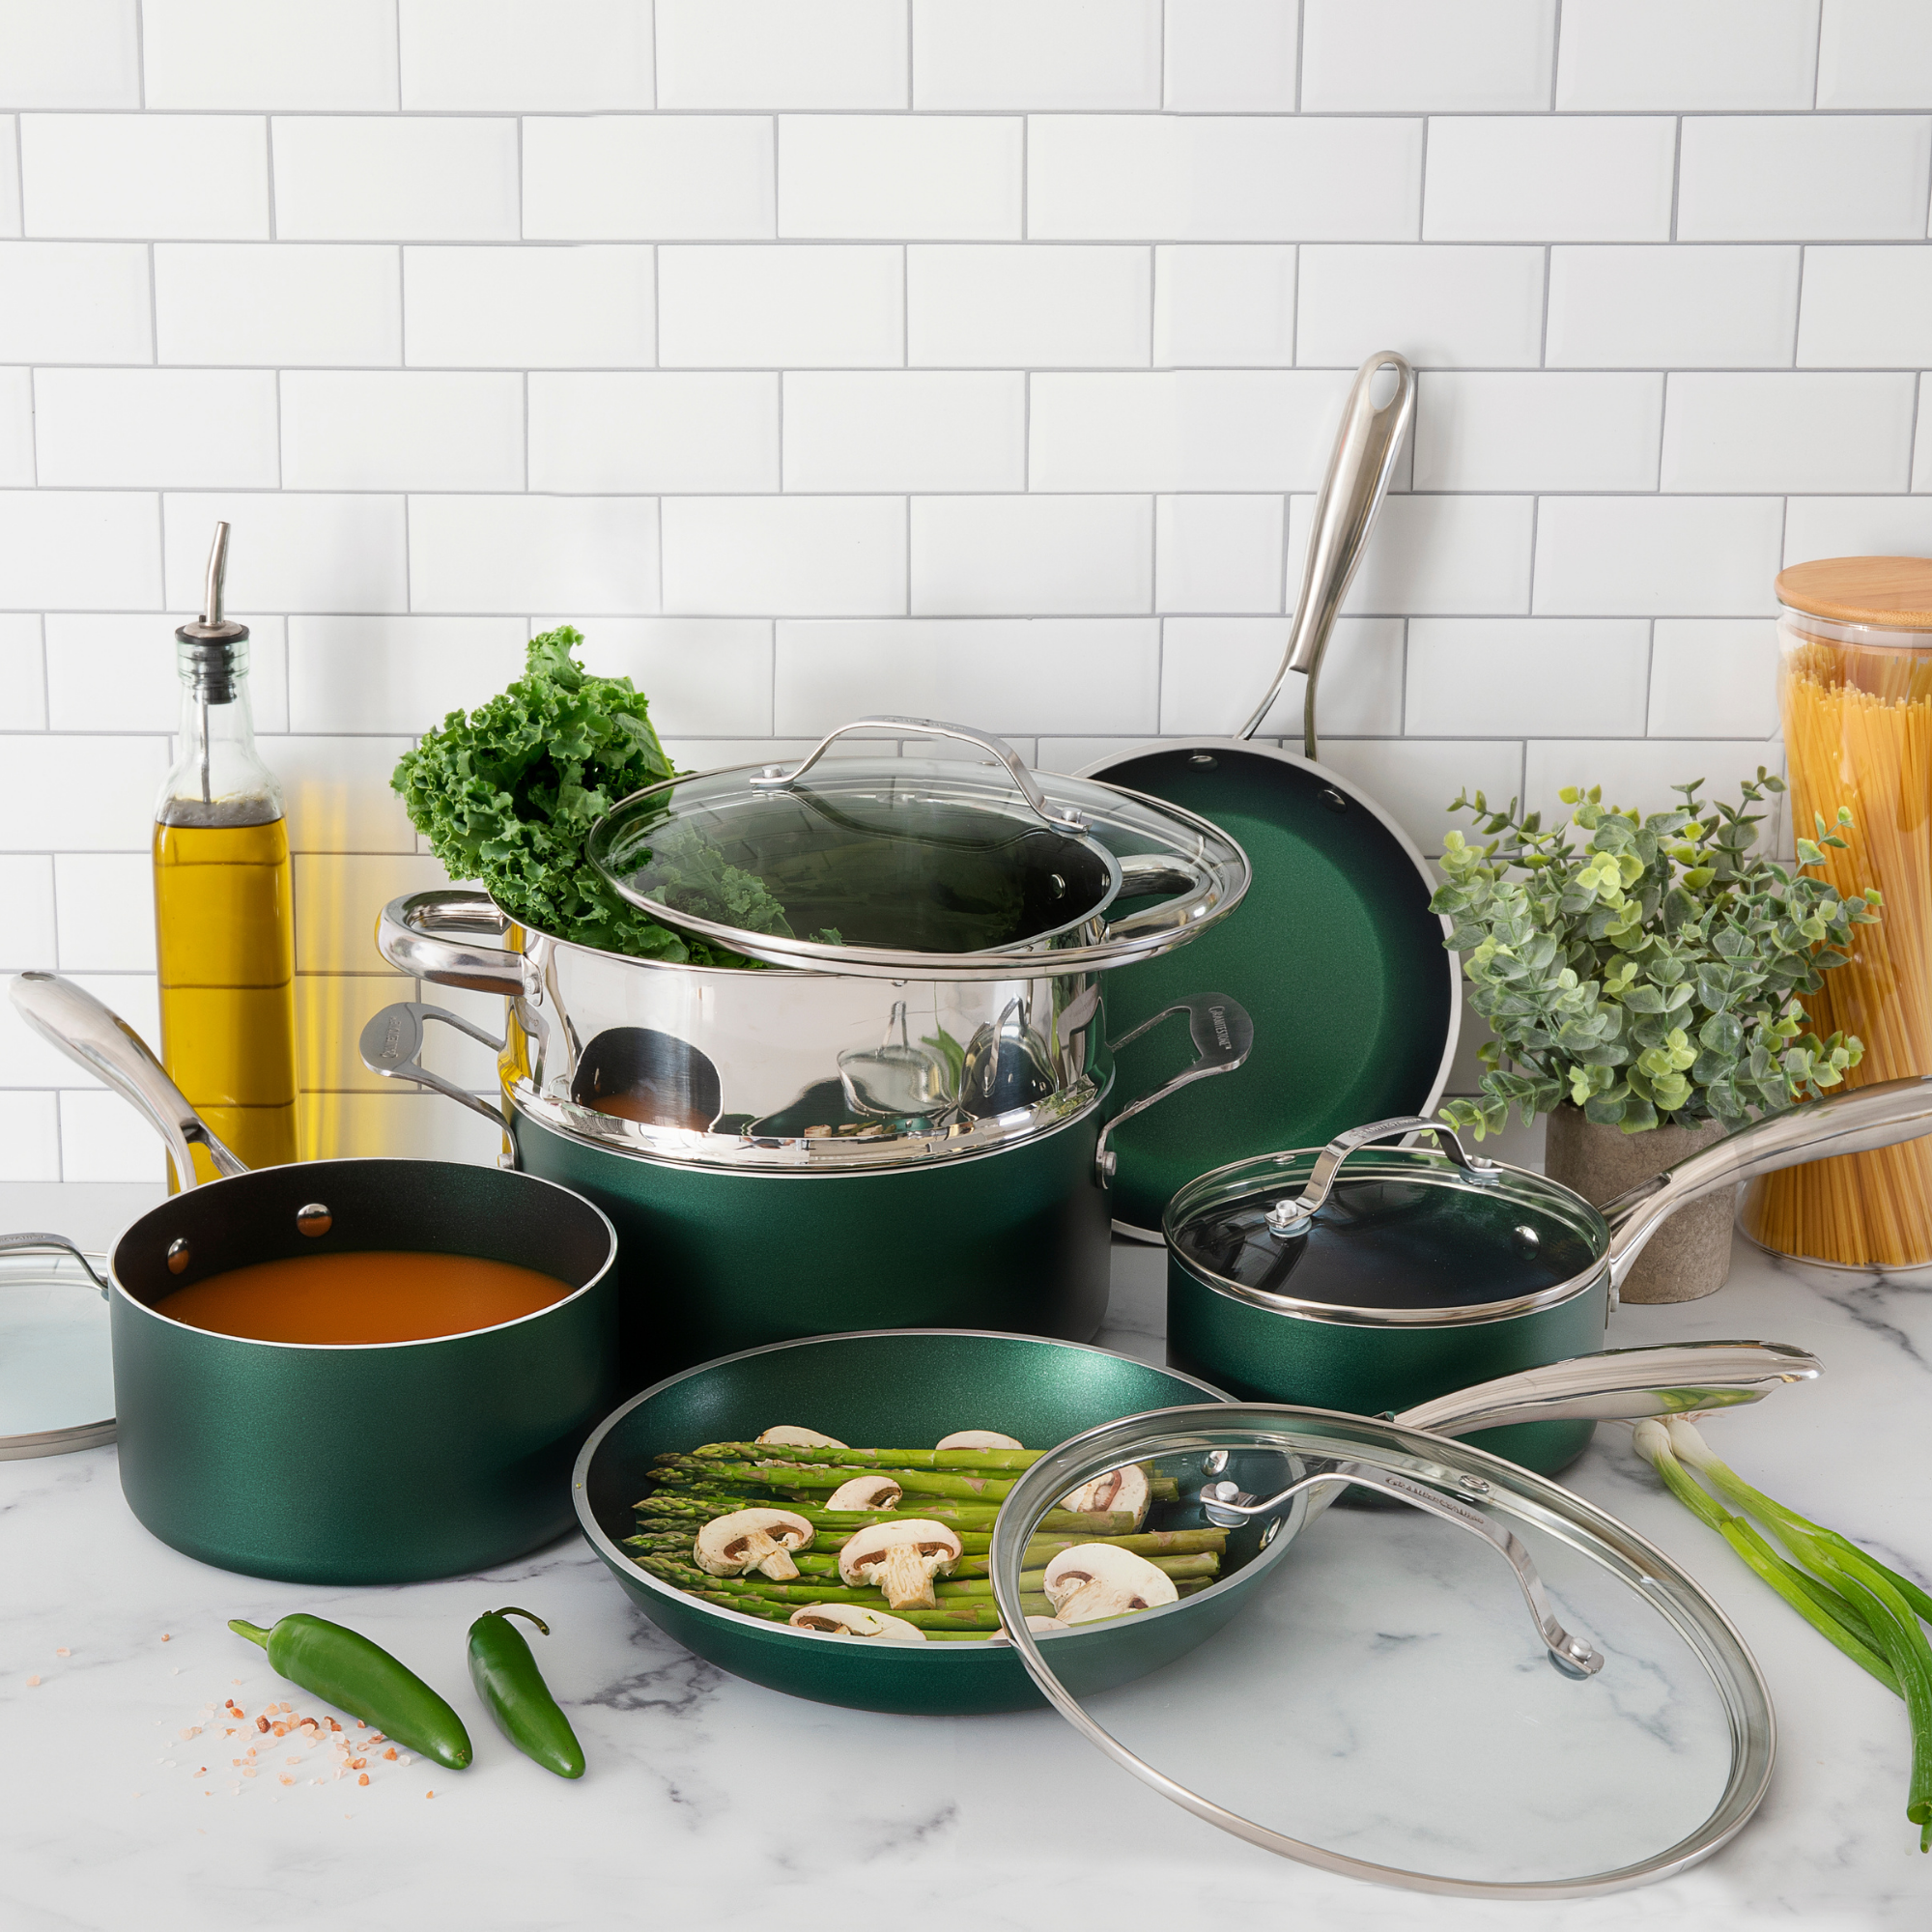 10-Piece Stackable Cookware Set - On Sale Now!